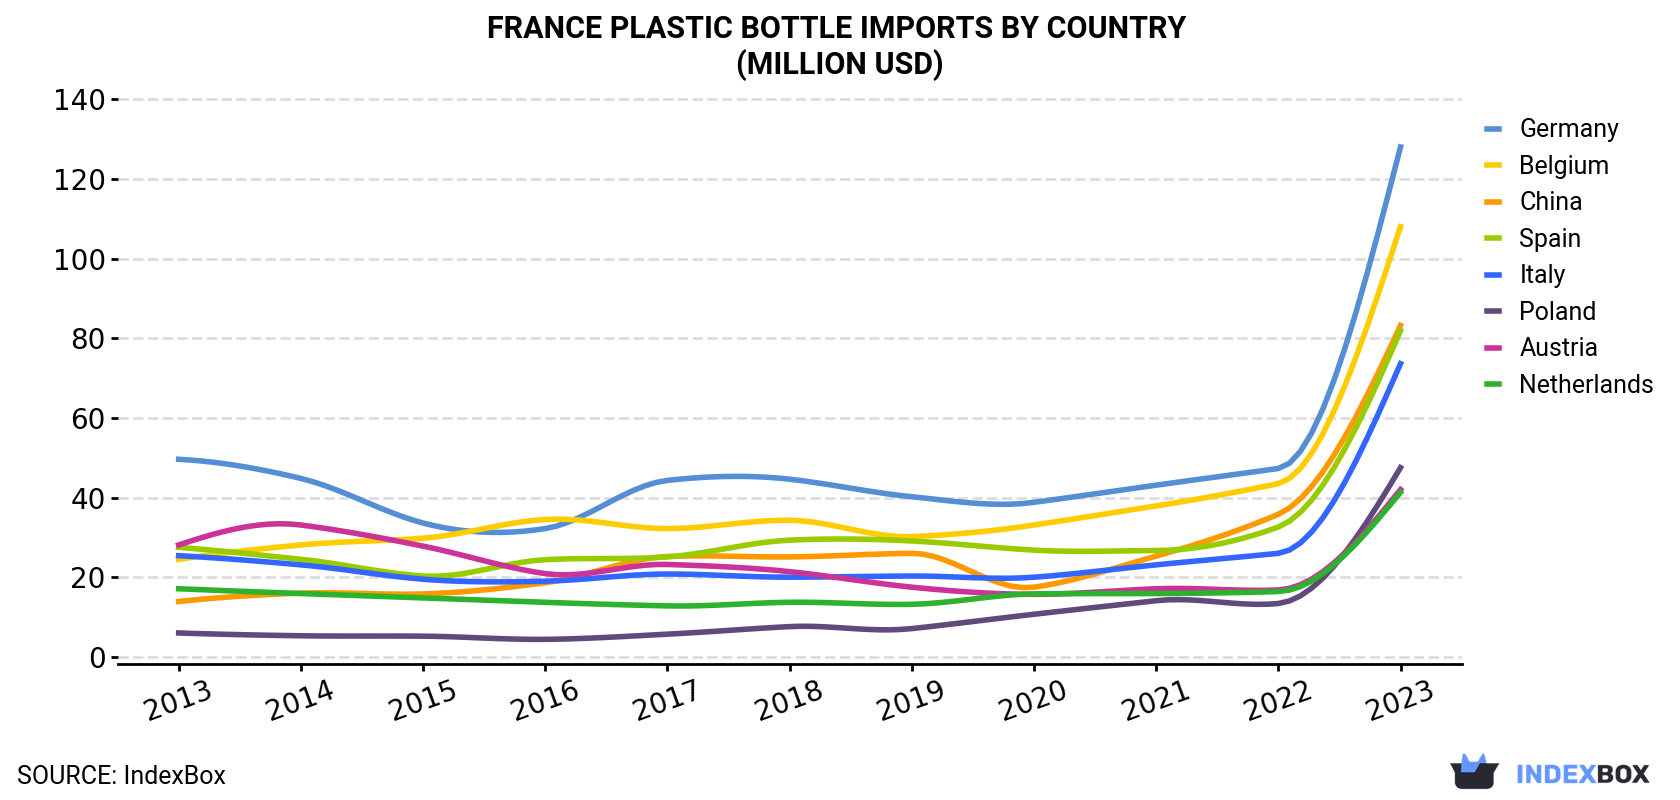 France Plastic Bottle Imports By Country (Million USD)